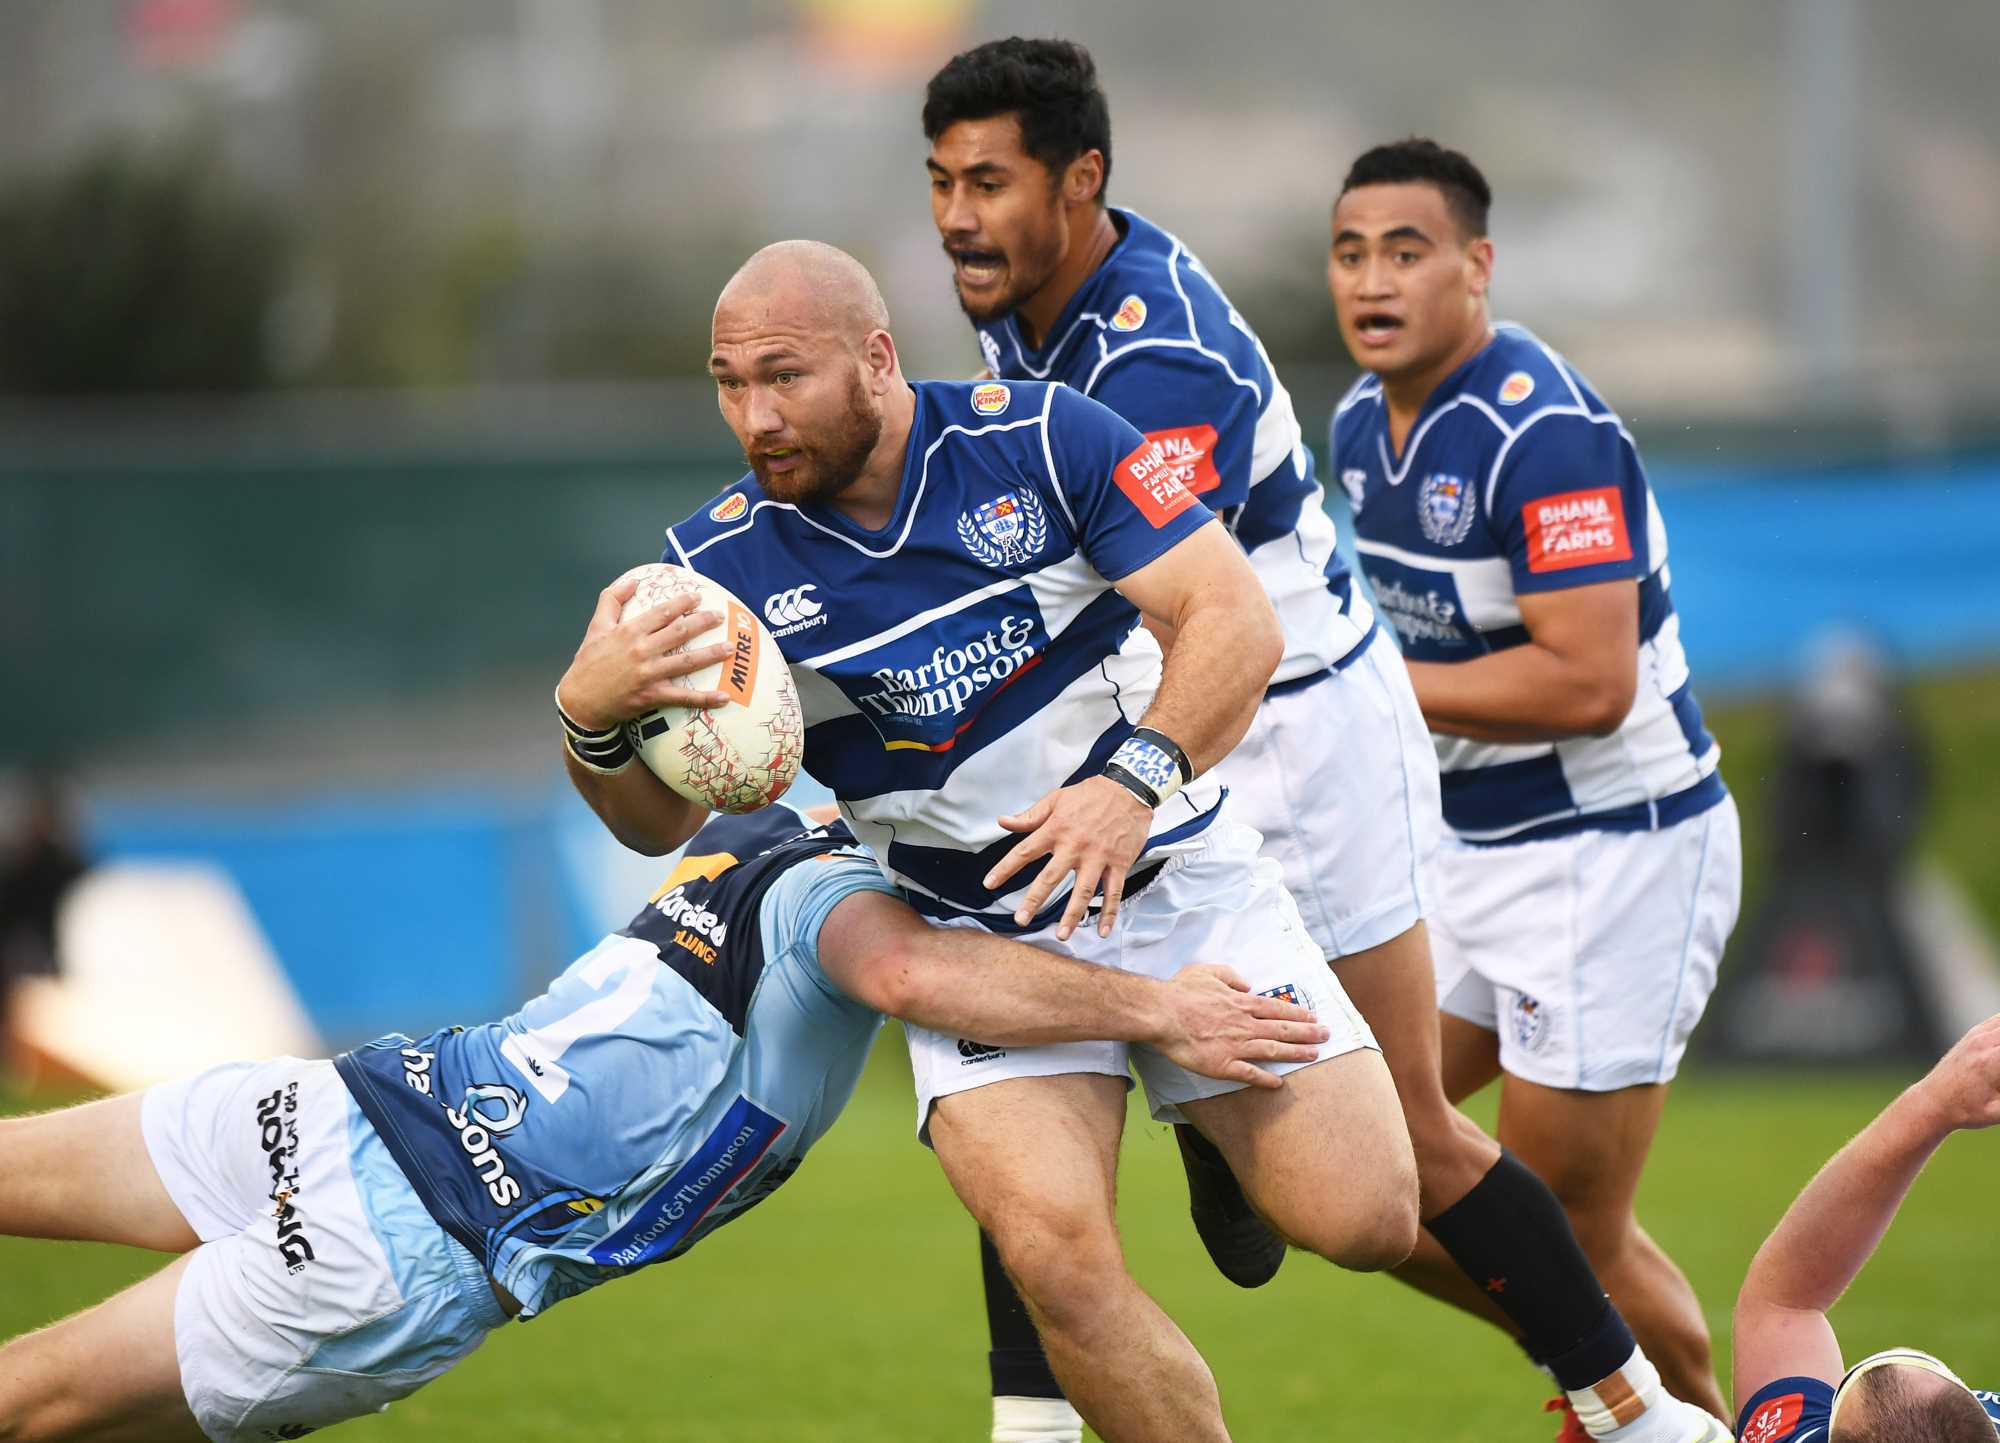 Auckland look to build on promising start (match day programme)